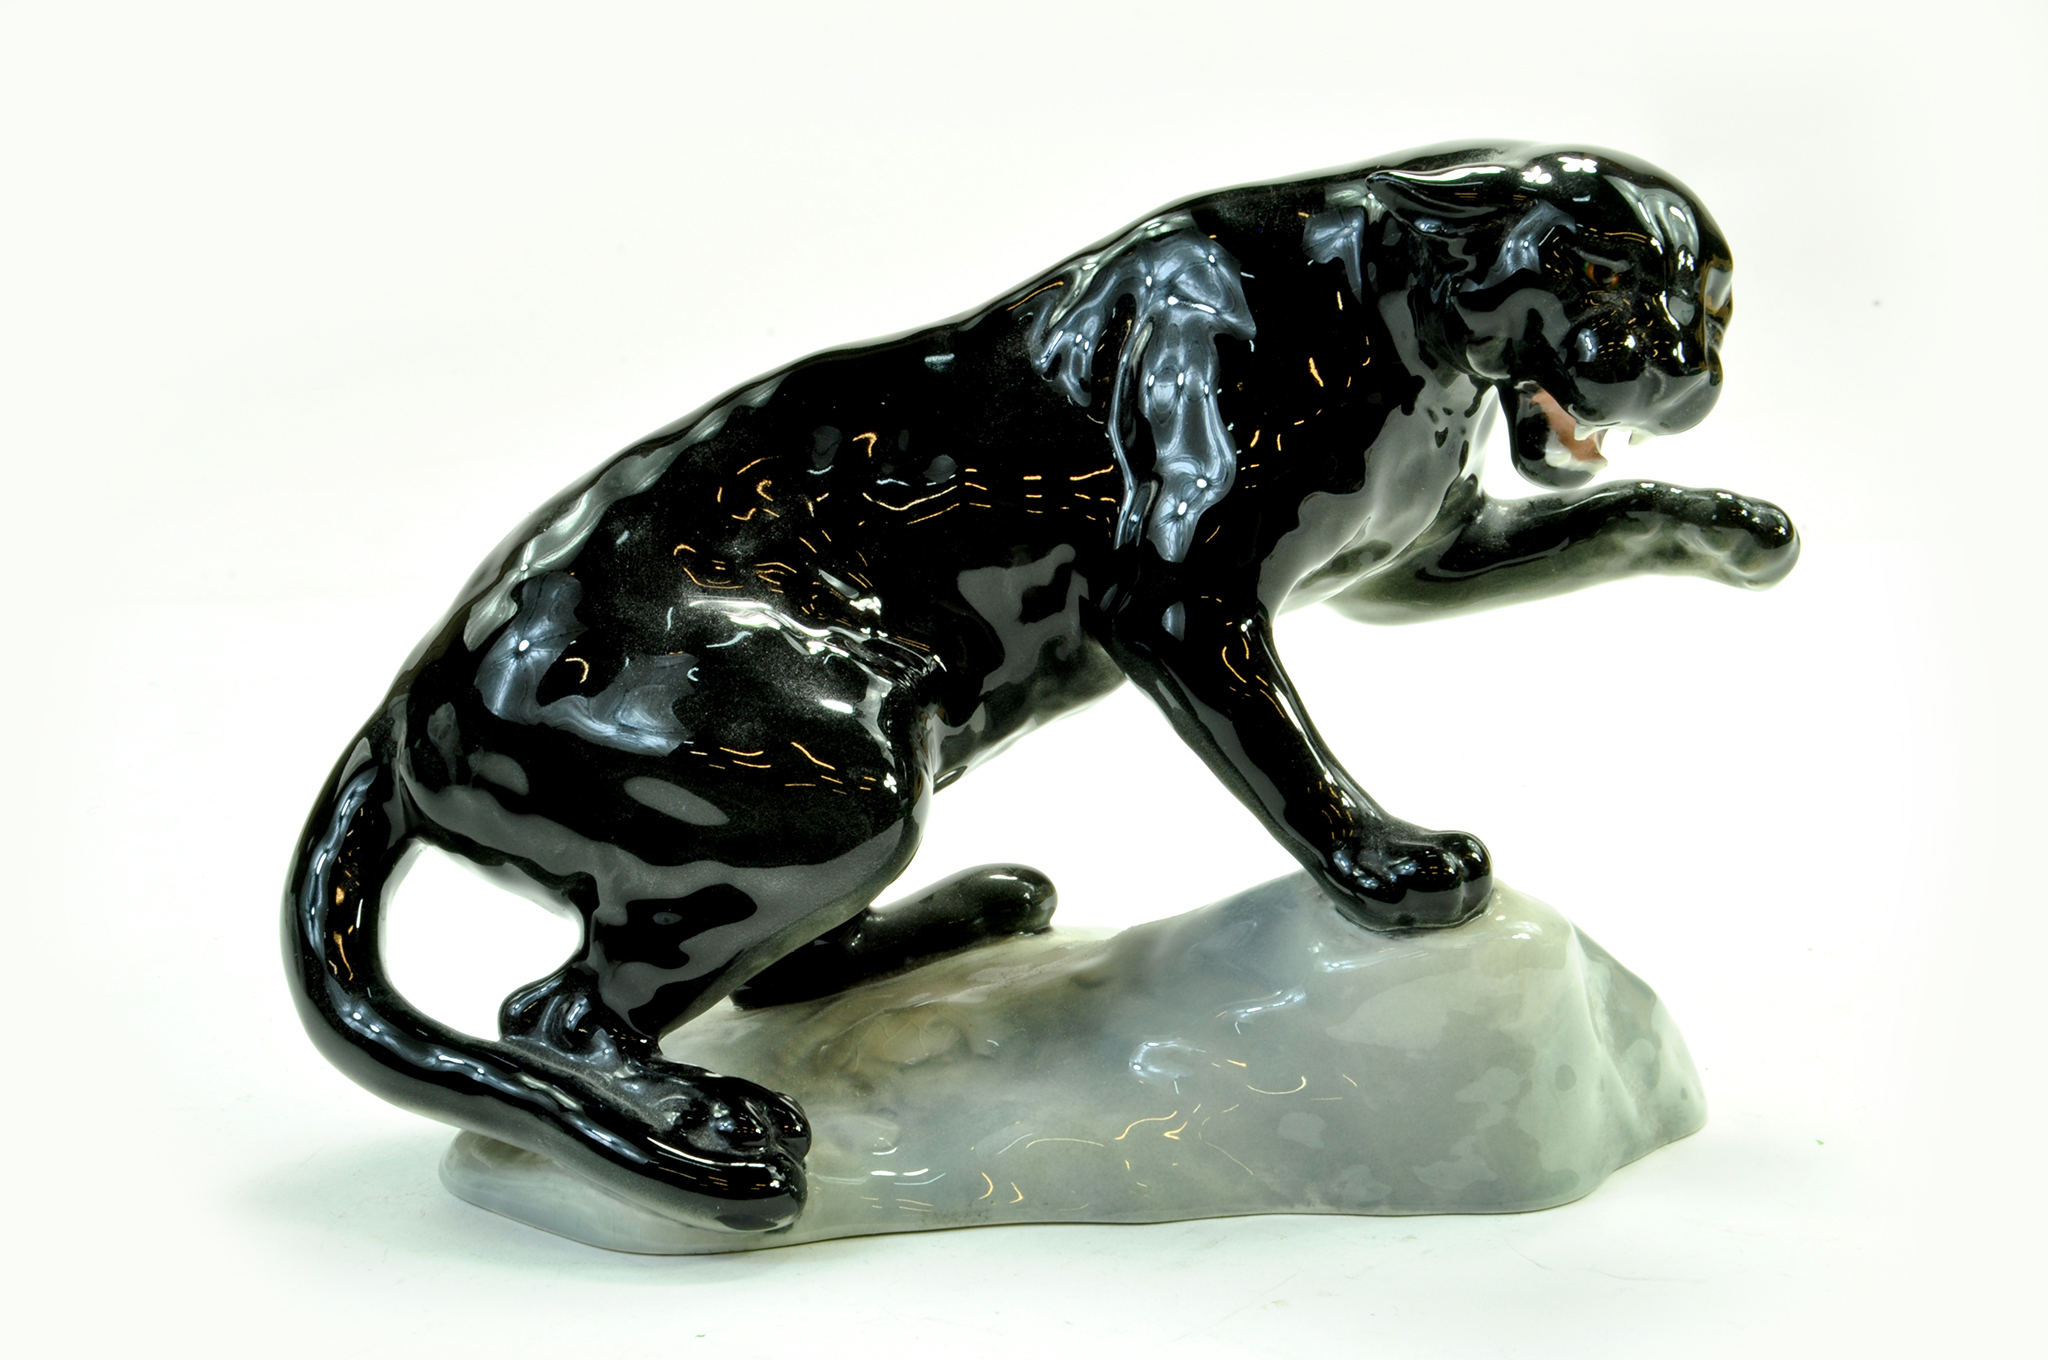 Beswick Puma on Rock Model No 1823 - 6” - 15.0cm Black – Gloss - No Faults. Note: We are happy to